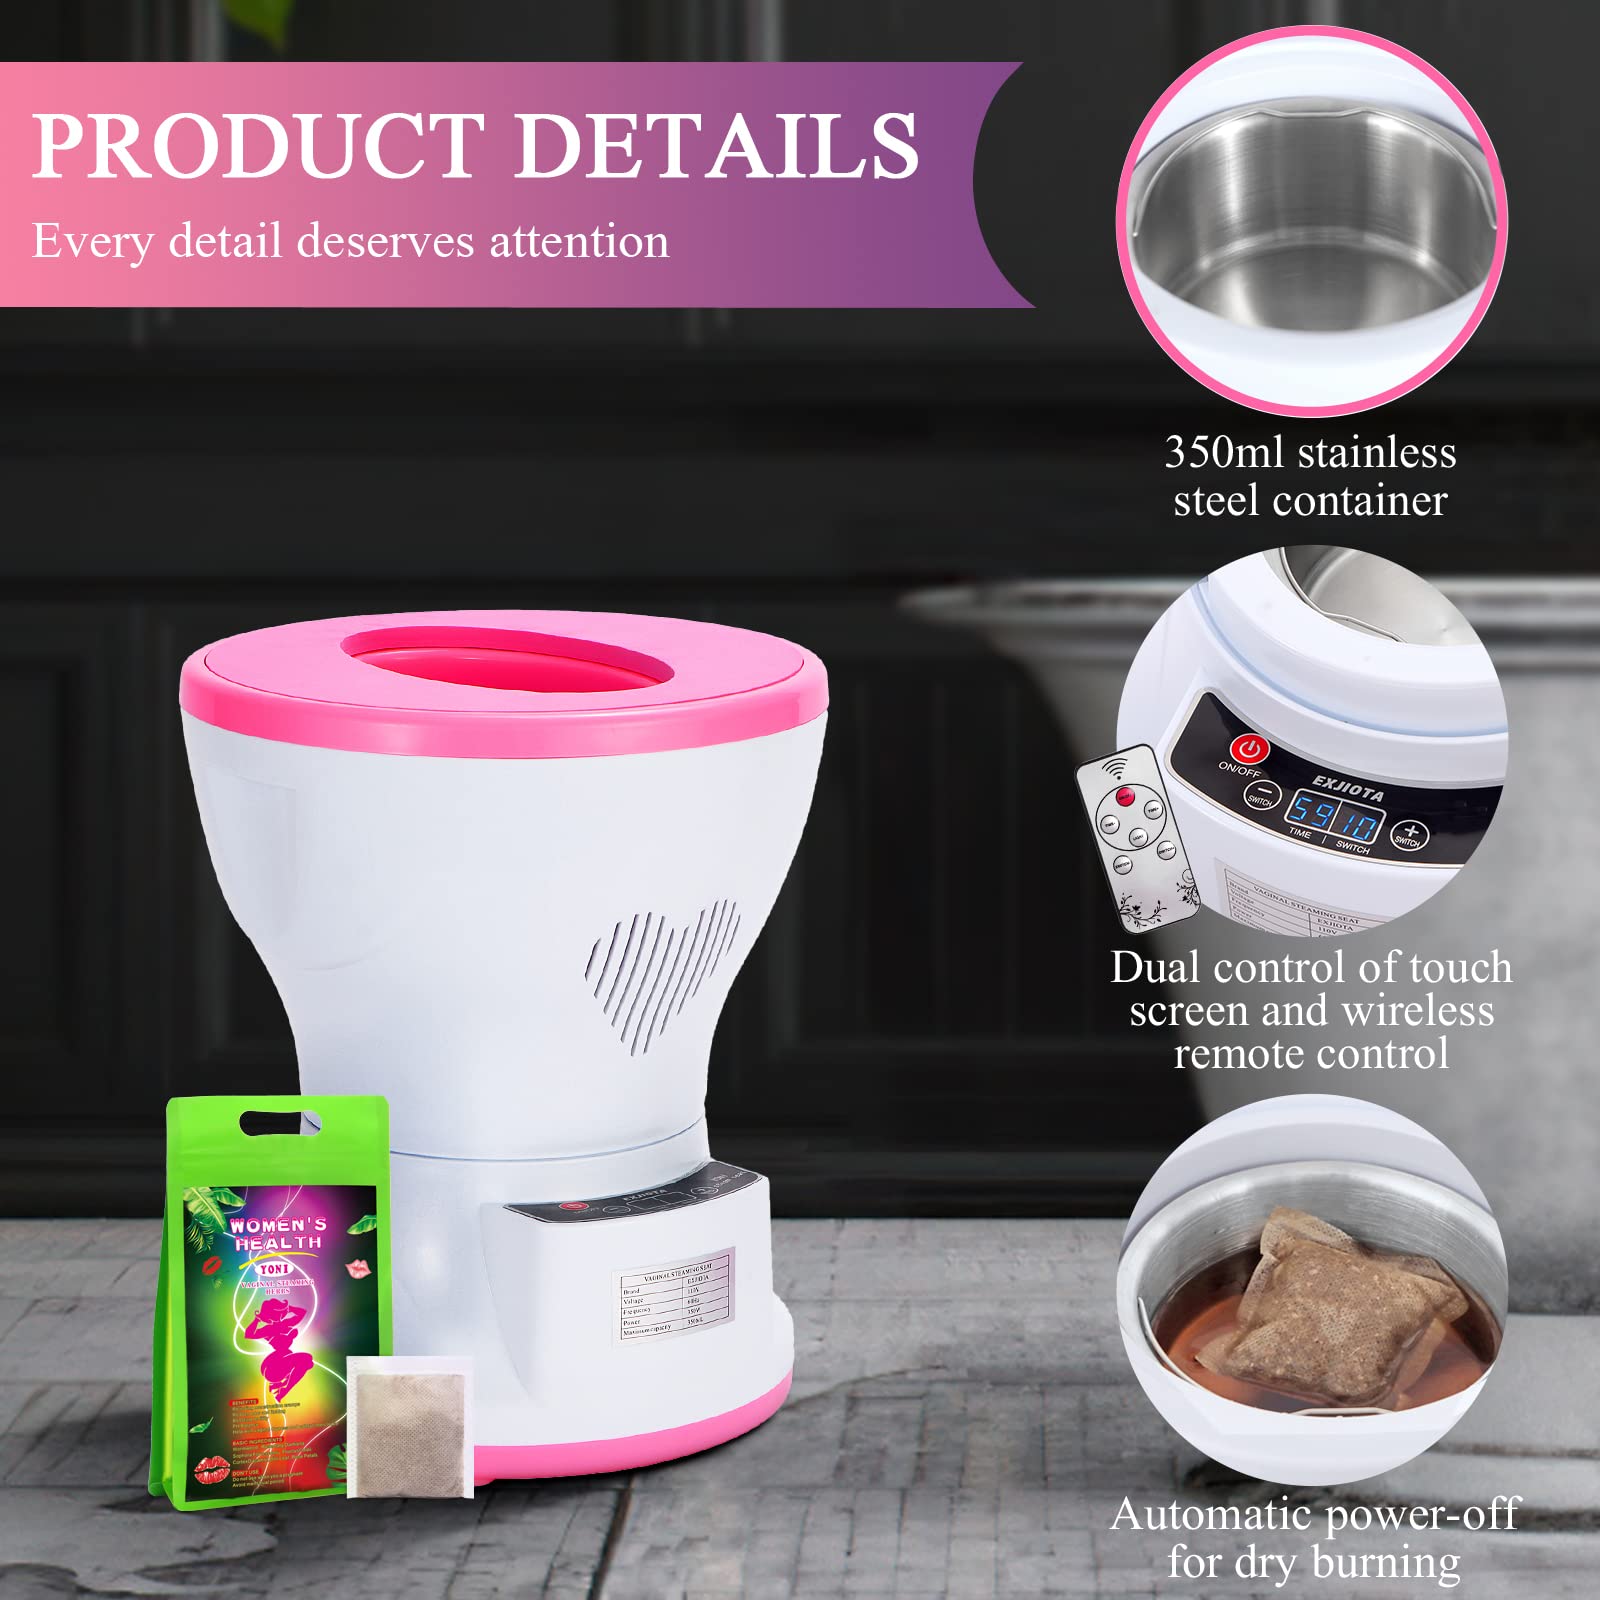 EXJIOTA Yoni Kit, Newest Steam Seat Yoni Pot with Remote Control and Steaming Herbs(20 Bags),100 PCS Disposable Seat Covers, Update Electric V Steam at Home Kit for Women Cleansing, Menstrual Support and Feminine Odor